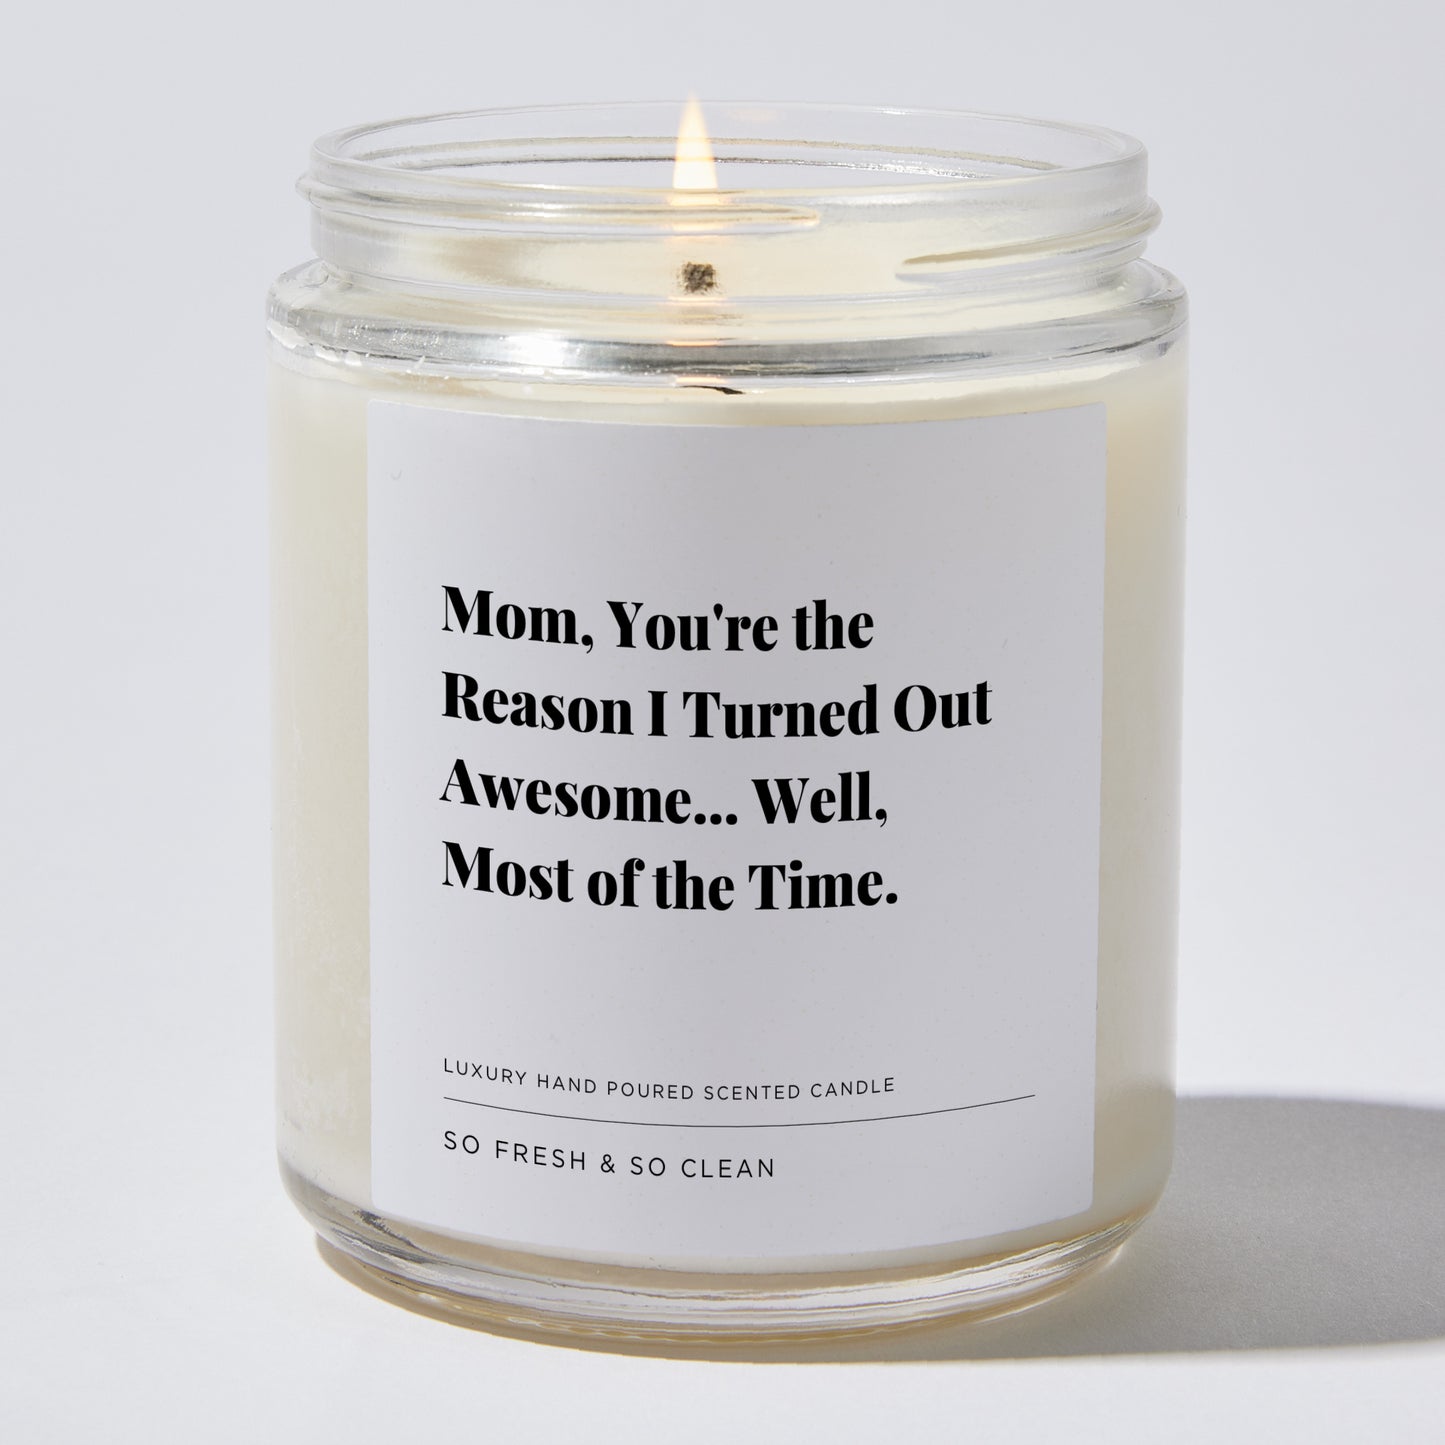 Gift for Mom - Mom, you're the reason I turned out awesome... well, most of the time. - Candle